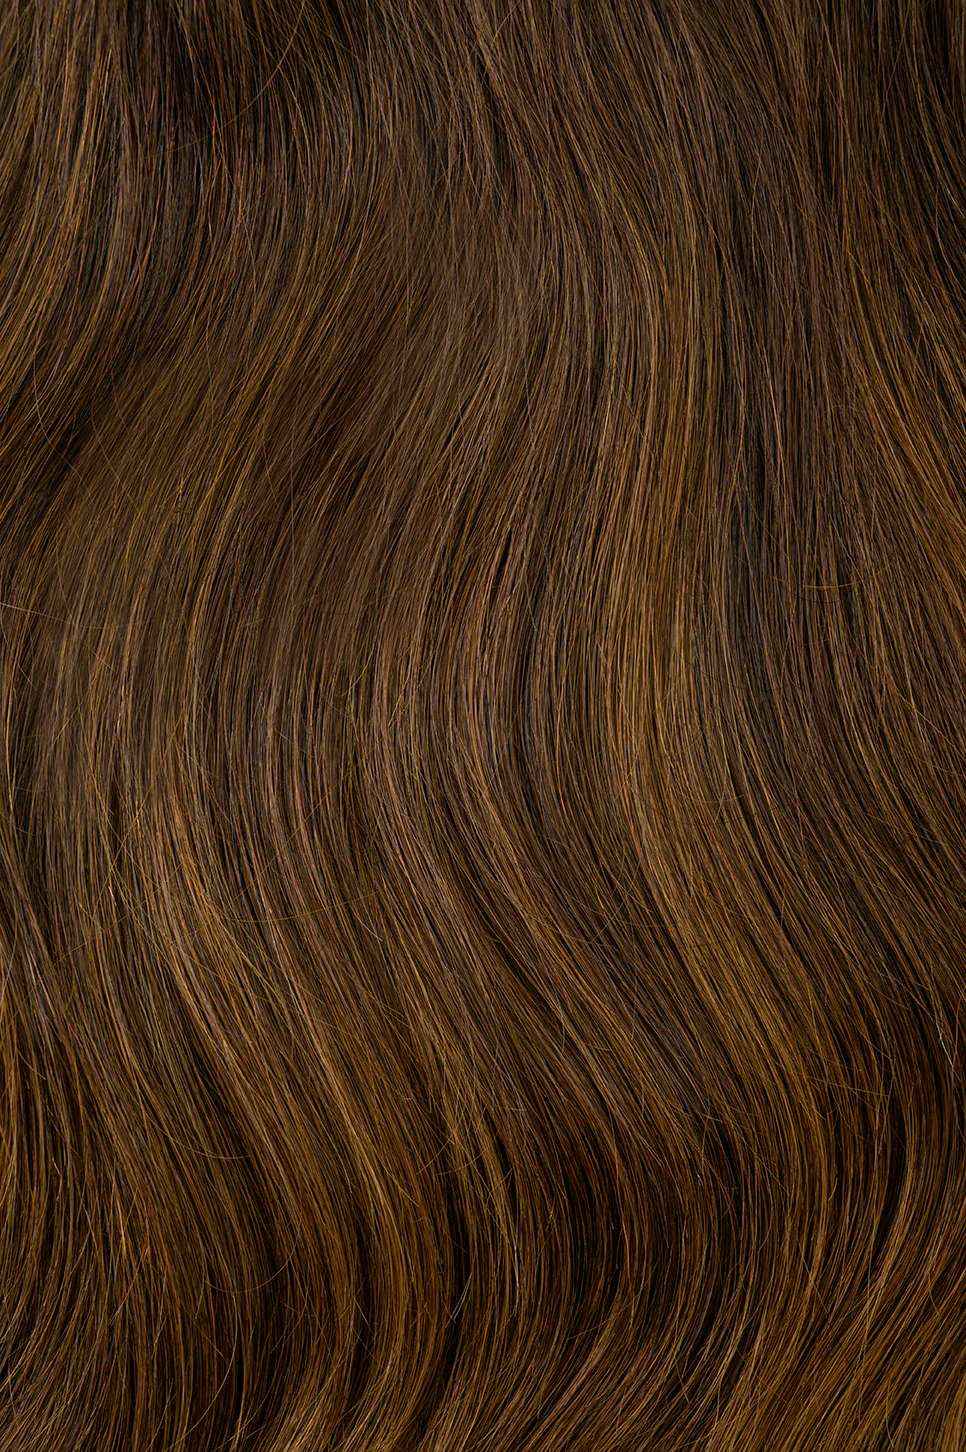 #Chocolate Brown Balayage Traditional Weft Extensions